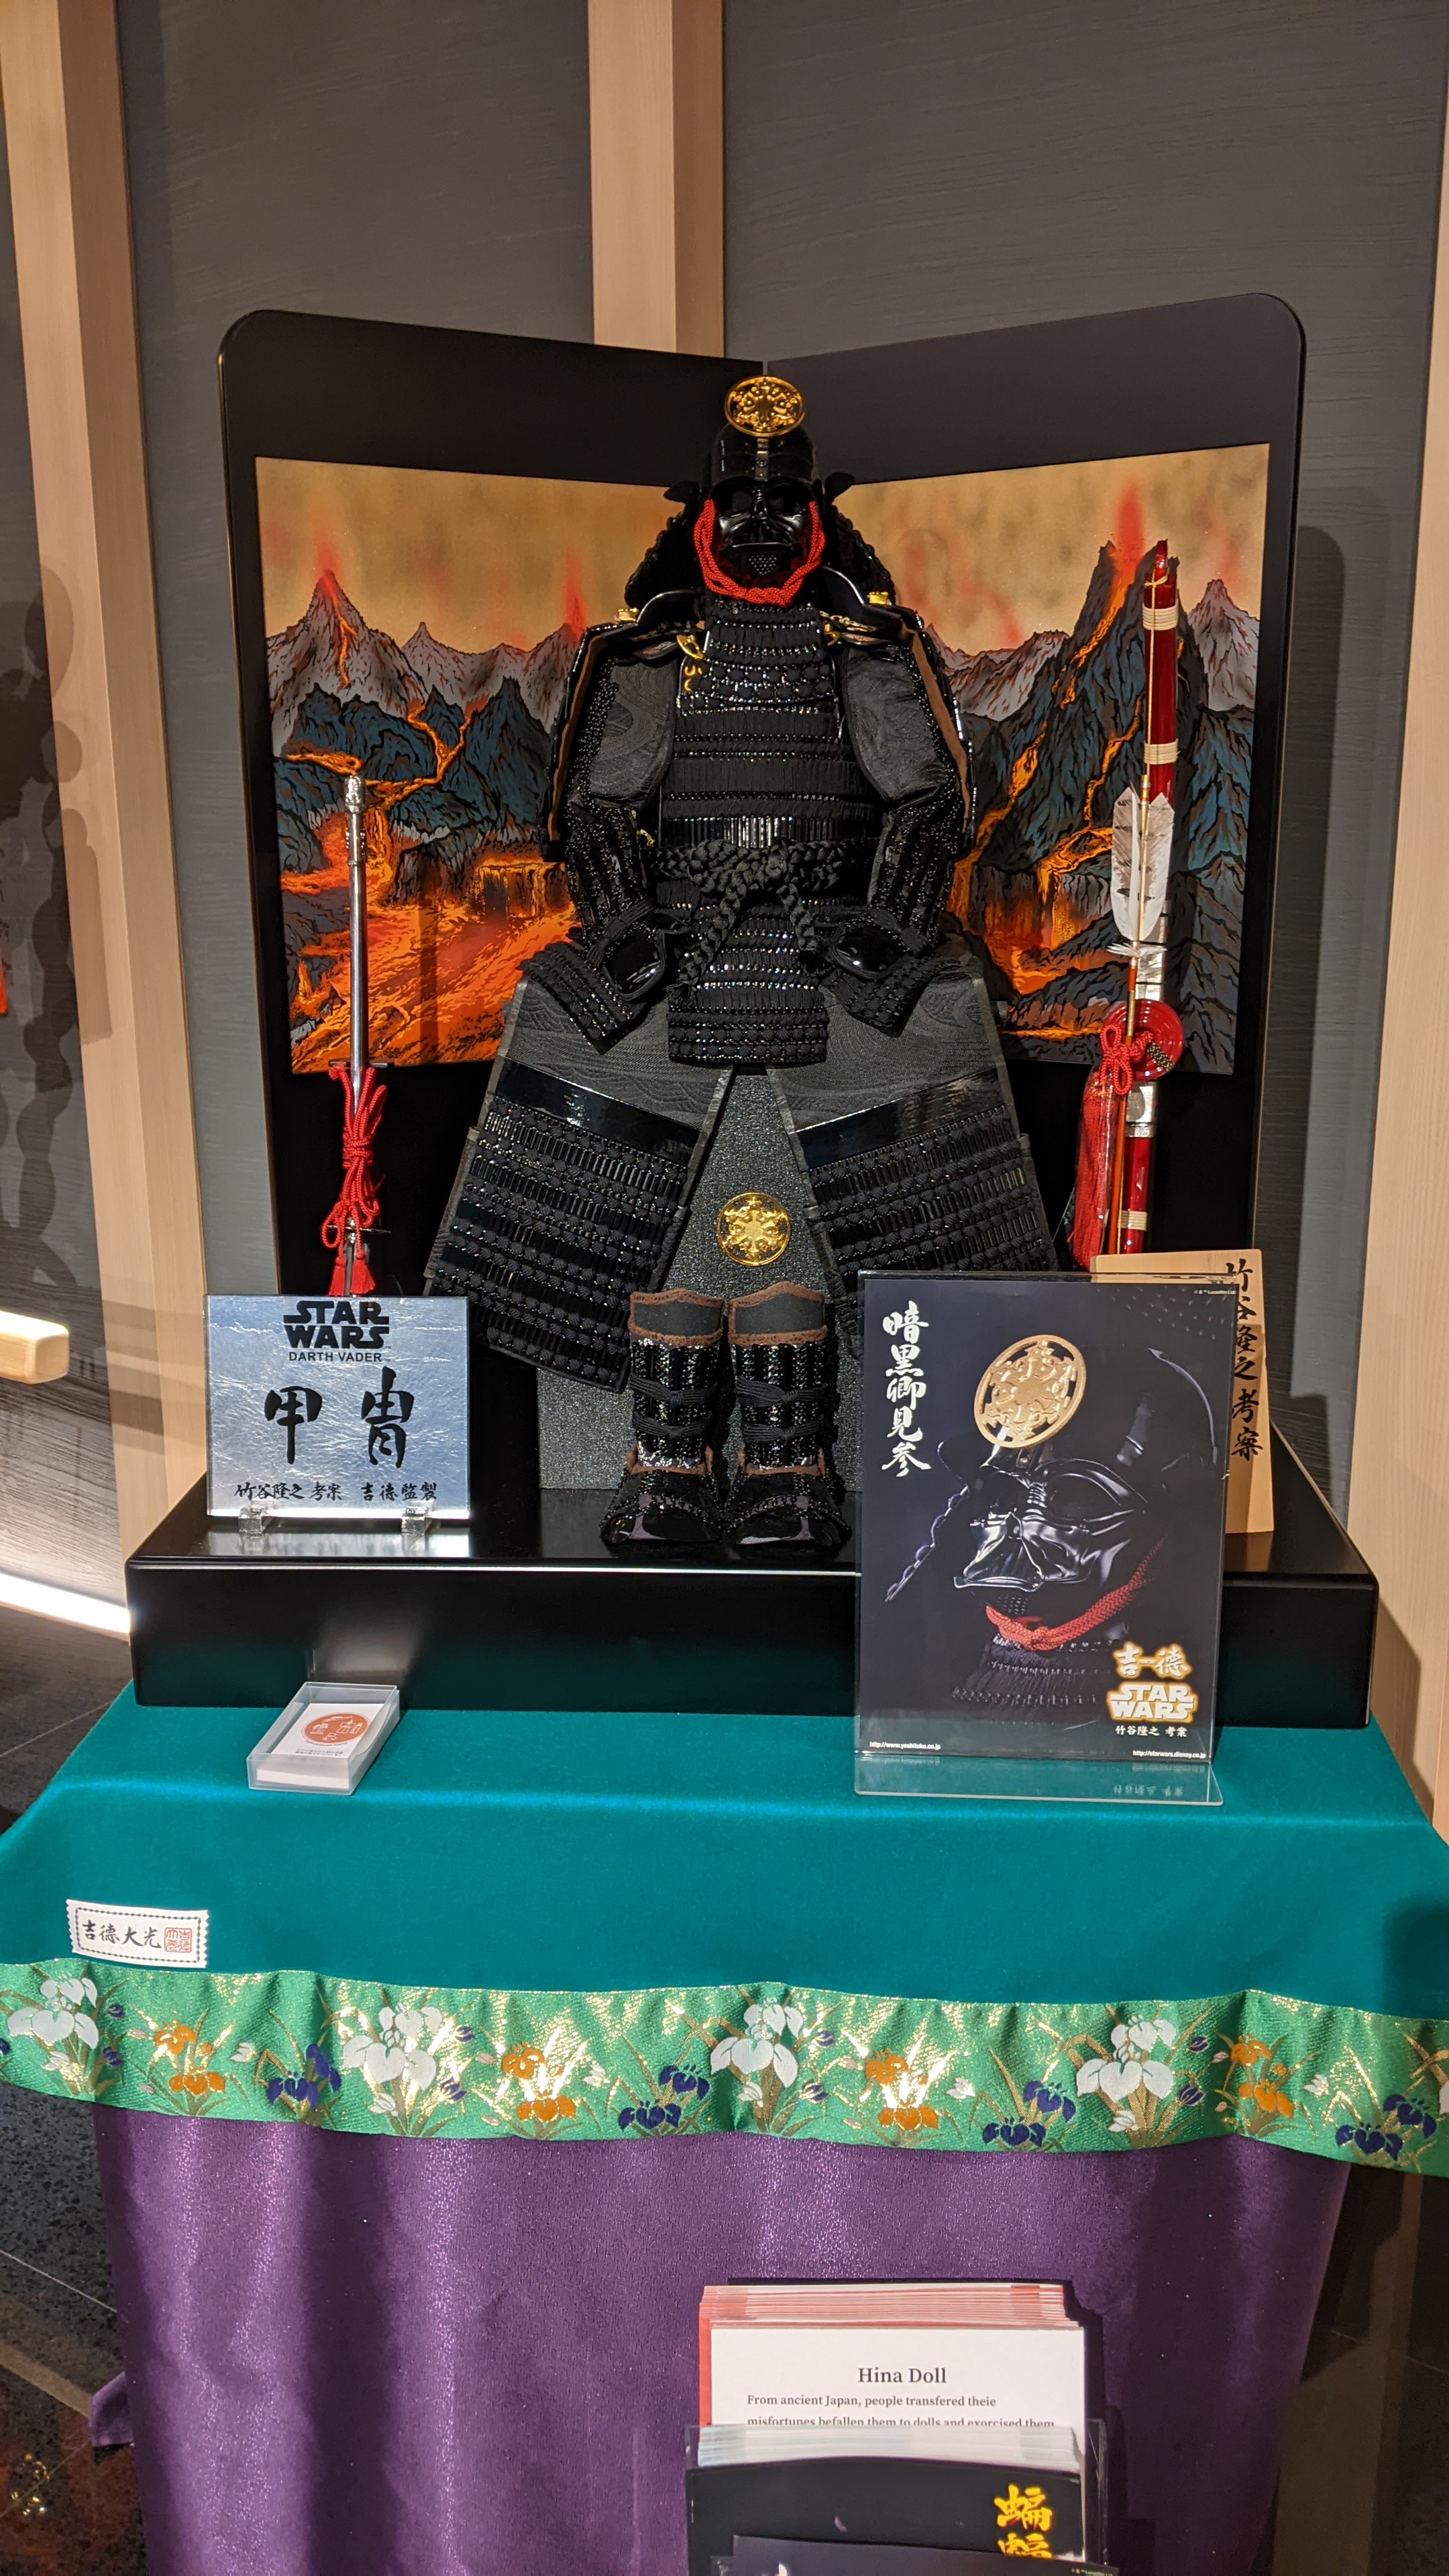 black samurai armour inspired by darth vader from star wars